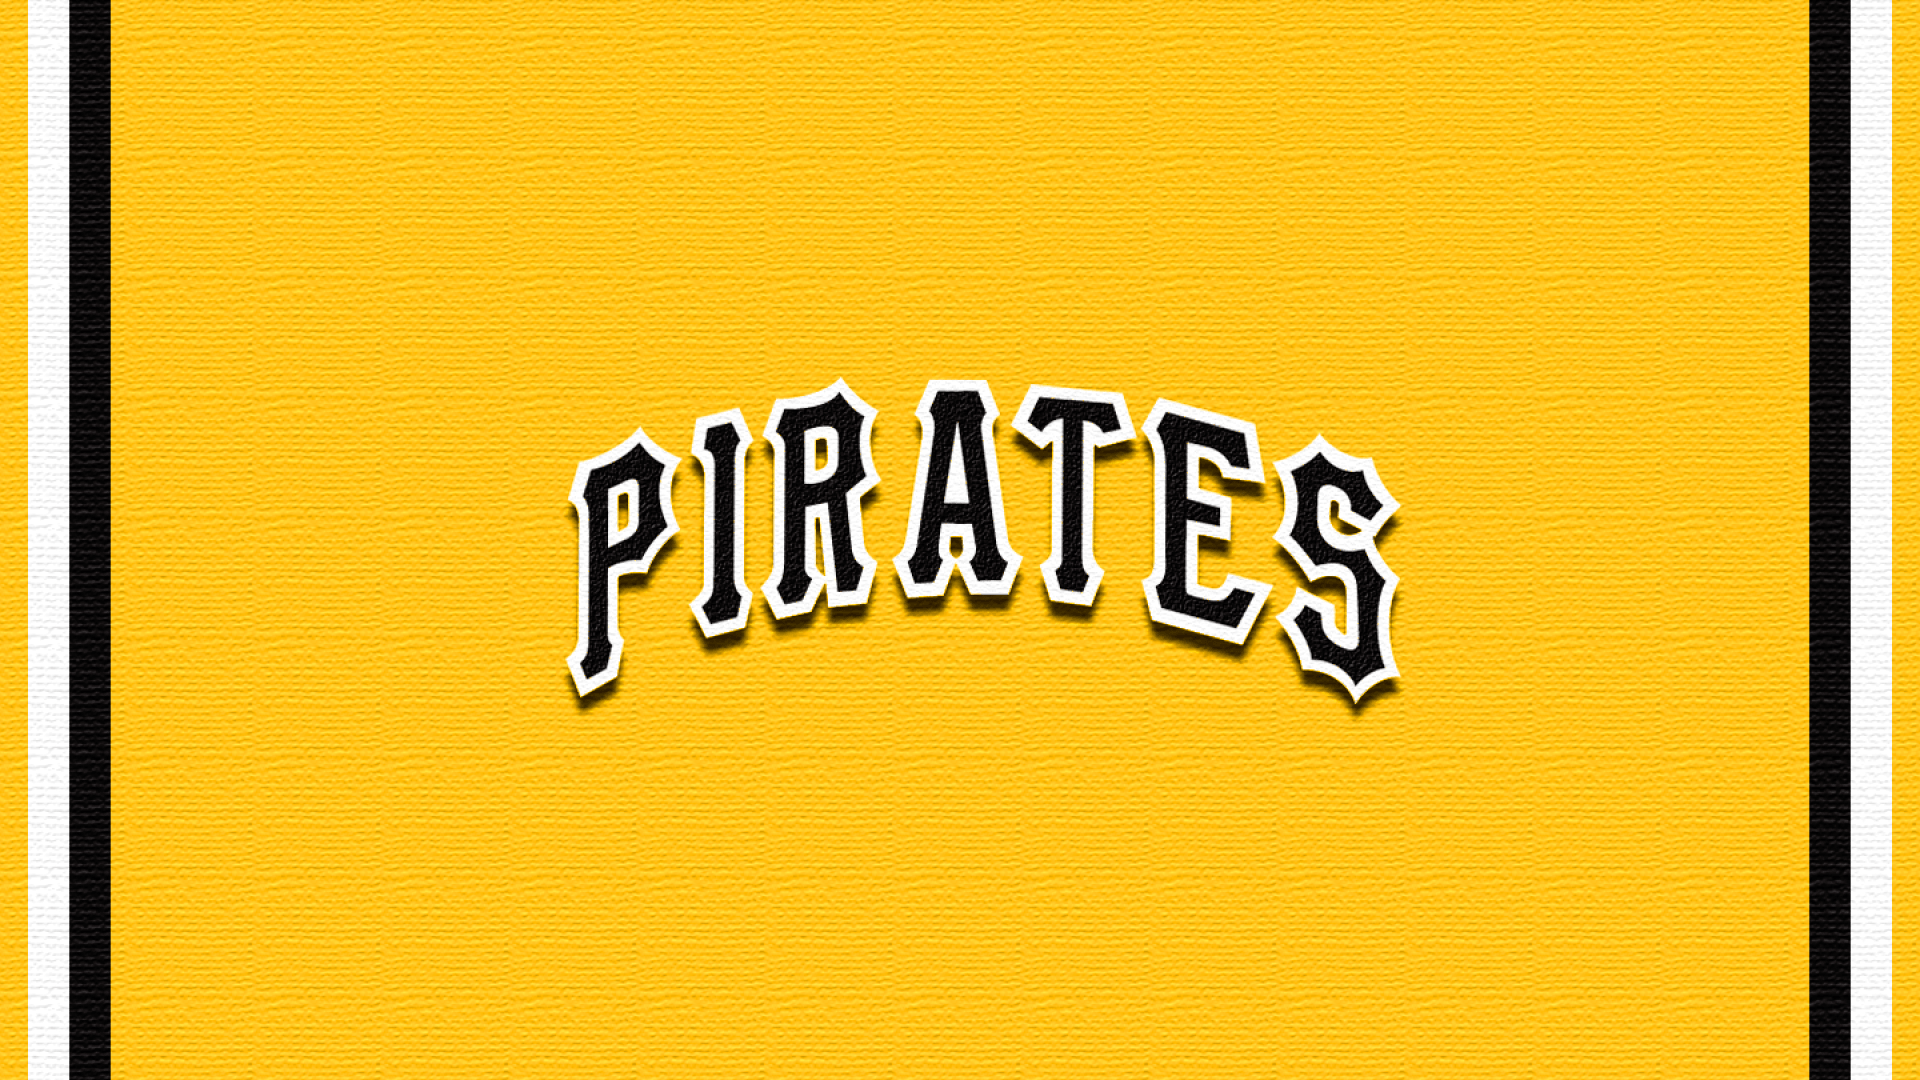 100+] Pittsburgh Pirates Wallpapers